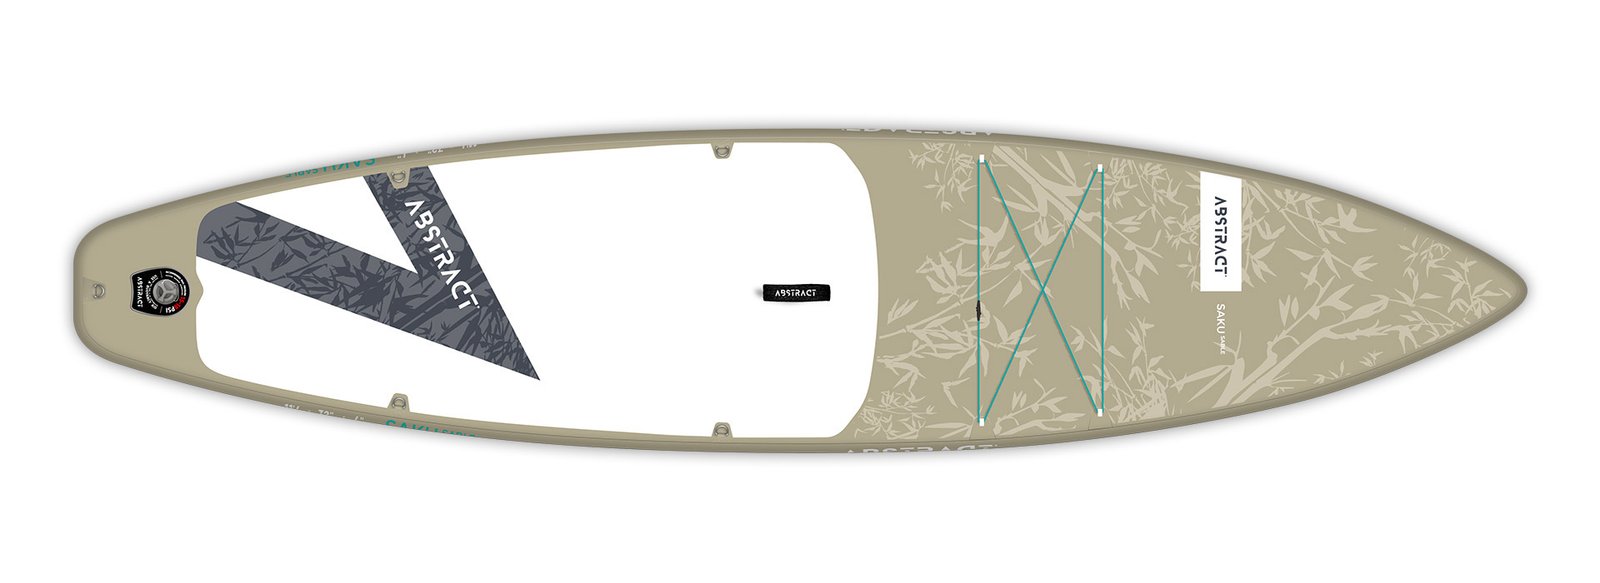 Planche de paddle Board gonflable Saku Sable (Geige) Abstract 2021